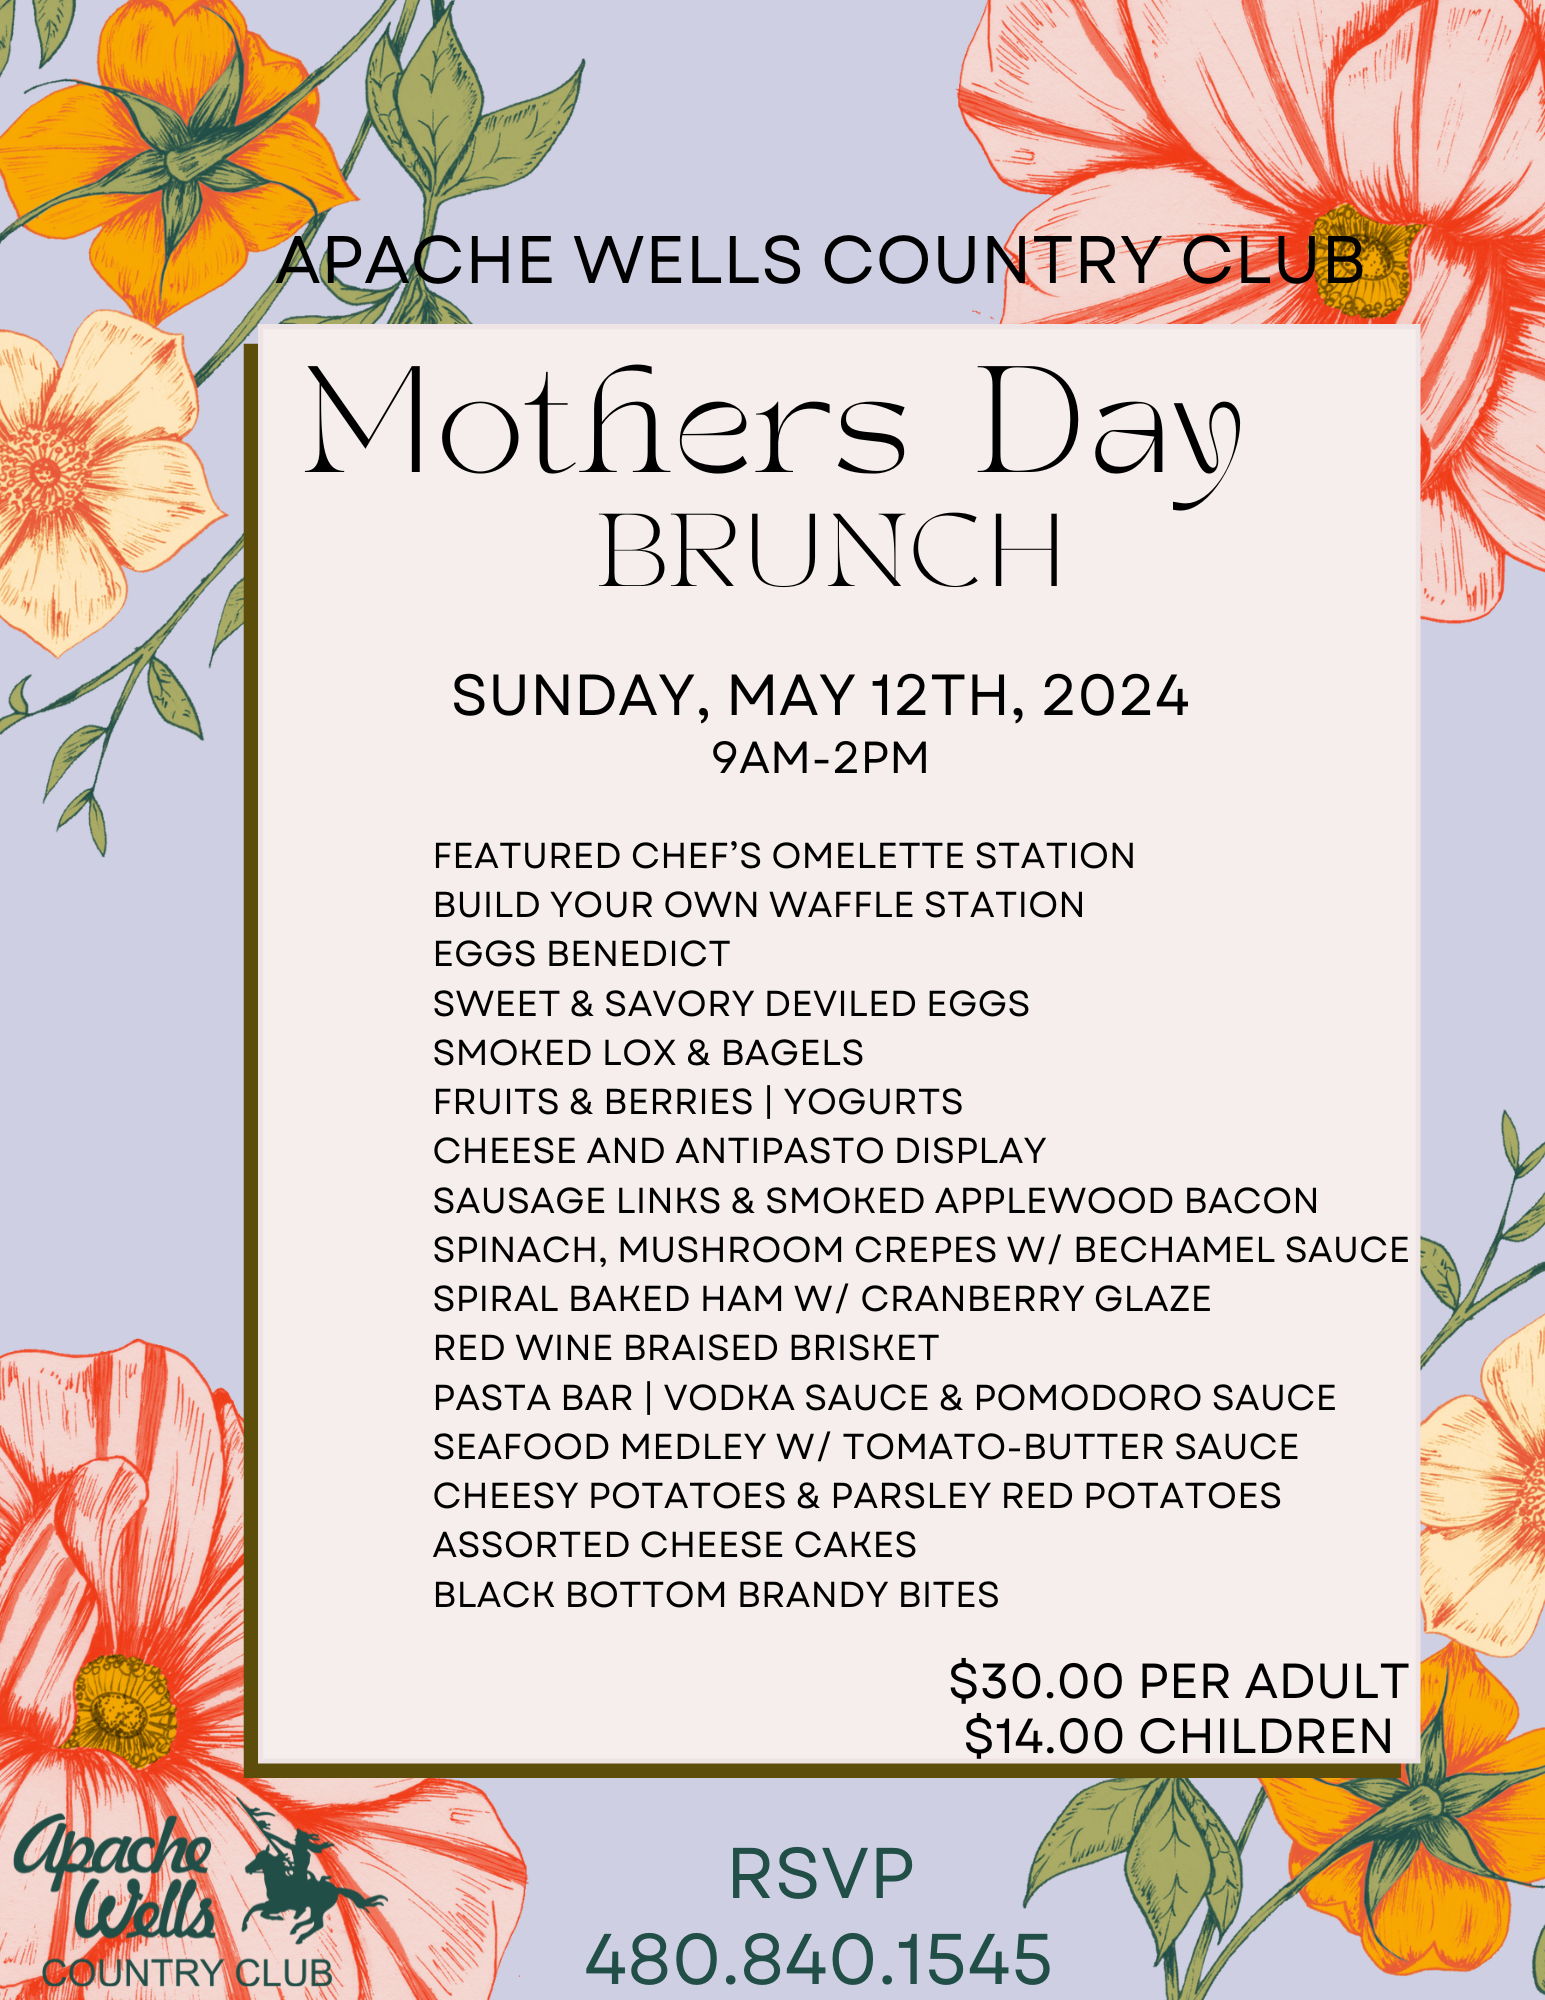 AWCC Mothers Day Brunch Menu